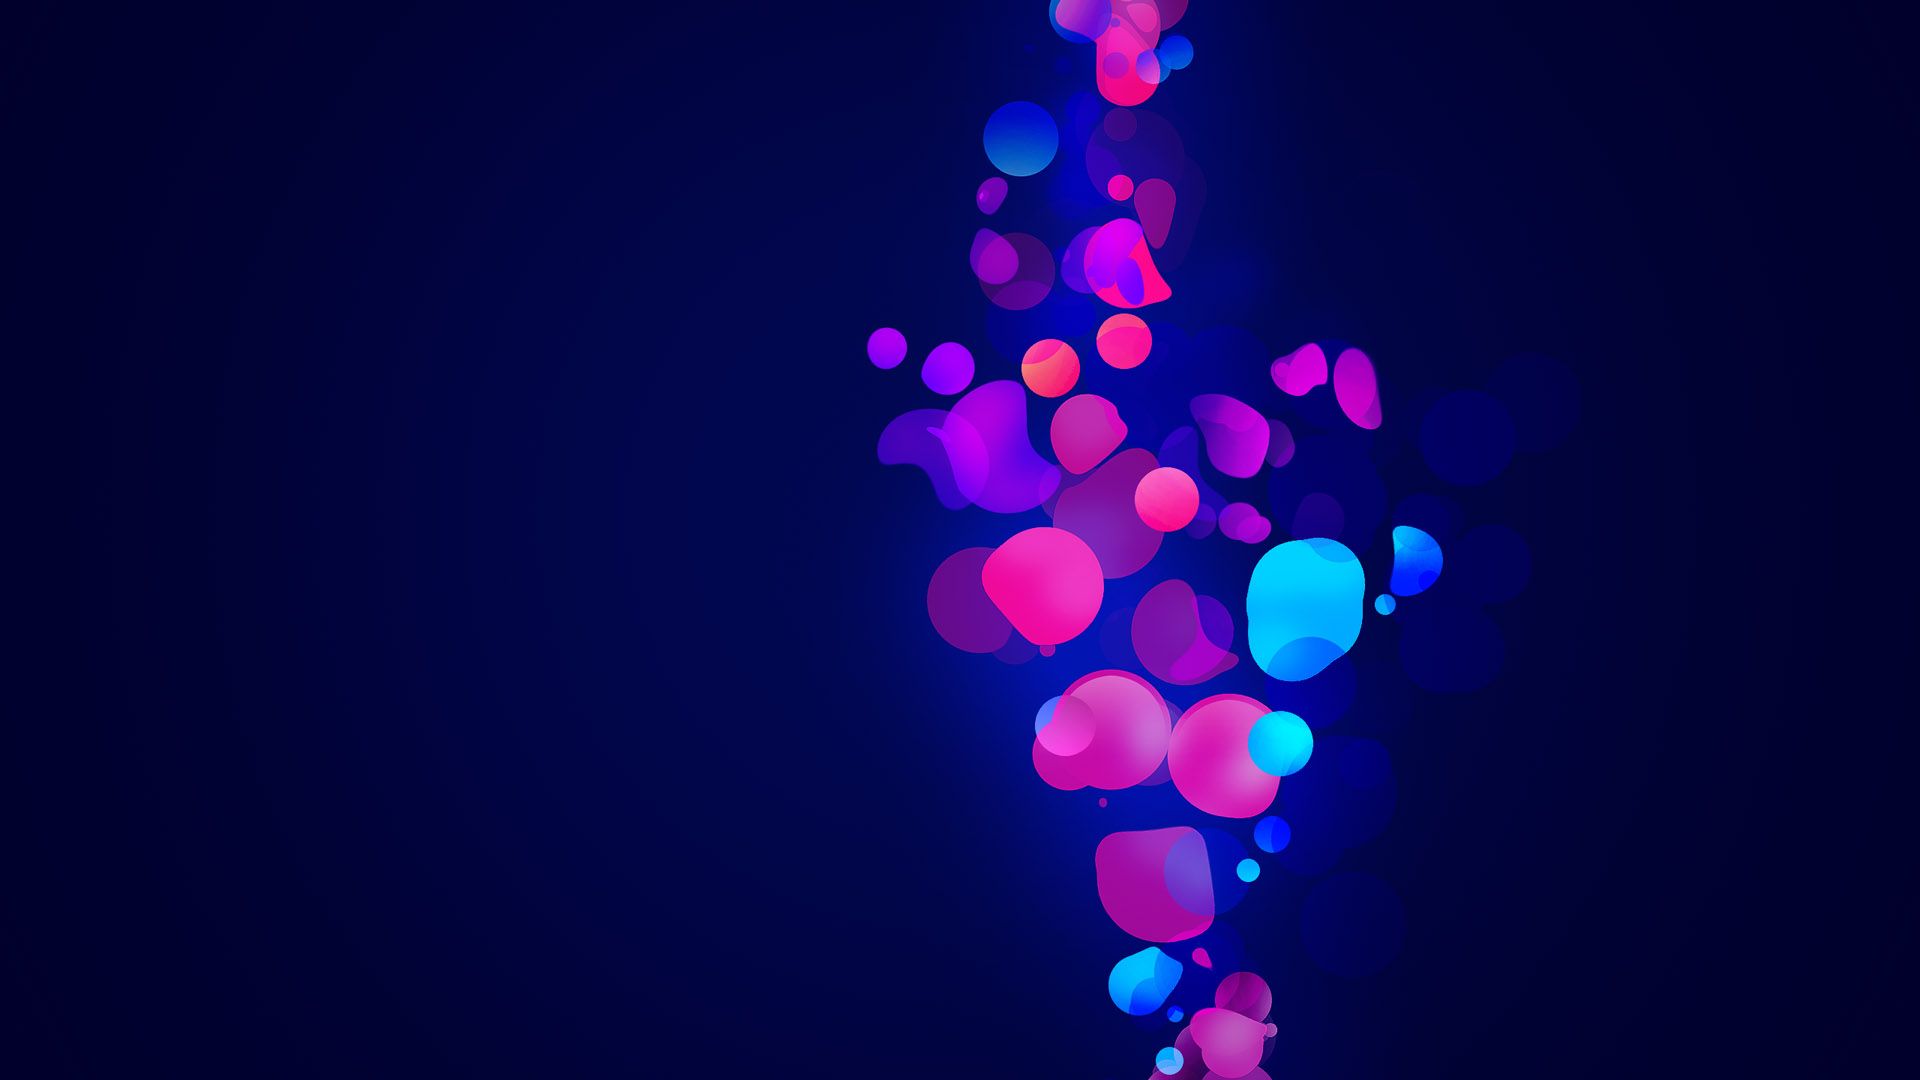 Abstract Blue & Pink Shapes desktop PC and Mac wallpaper